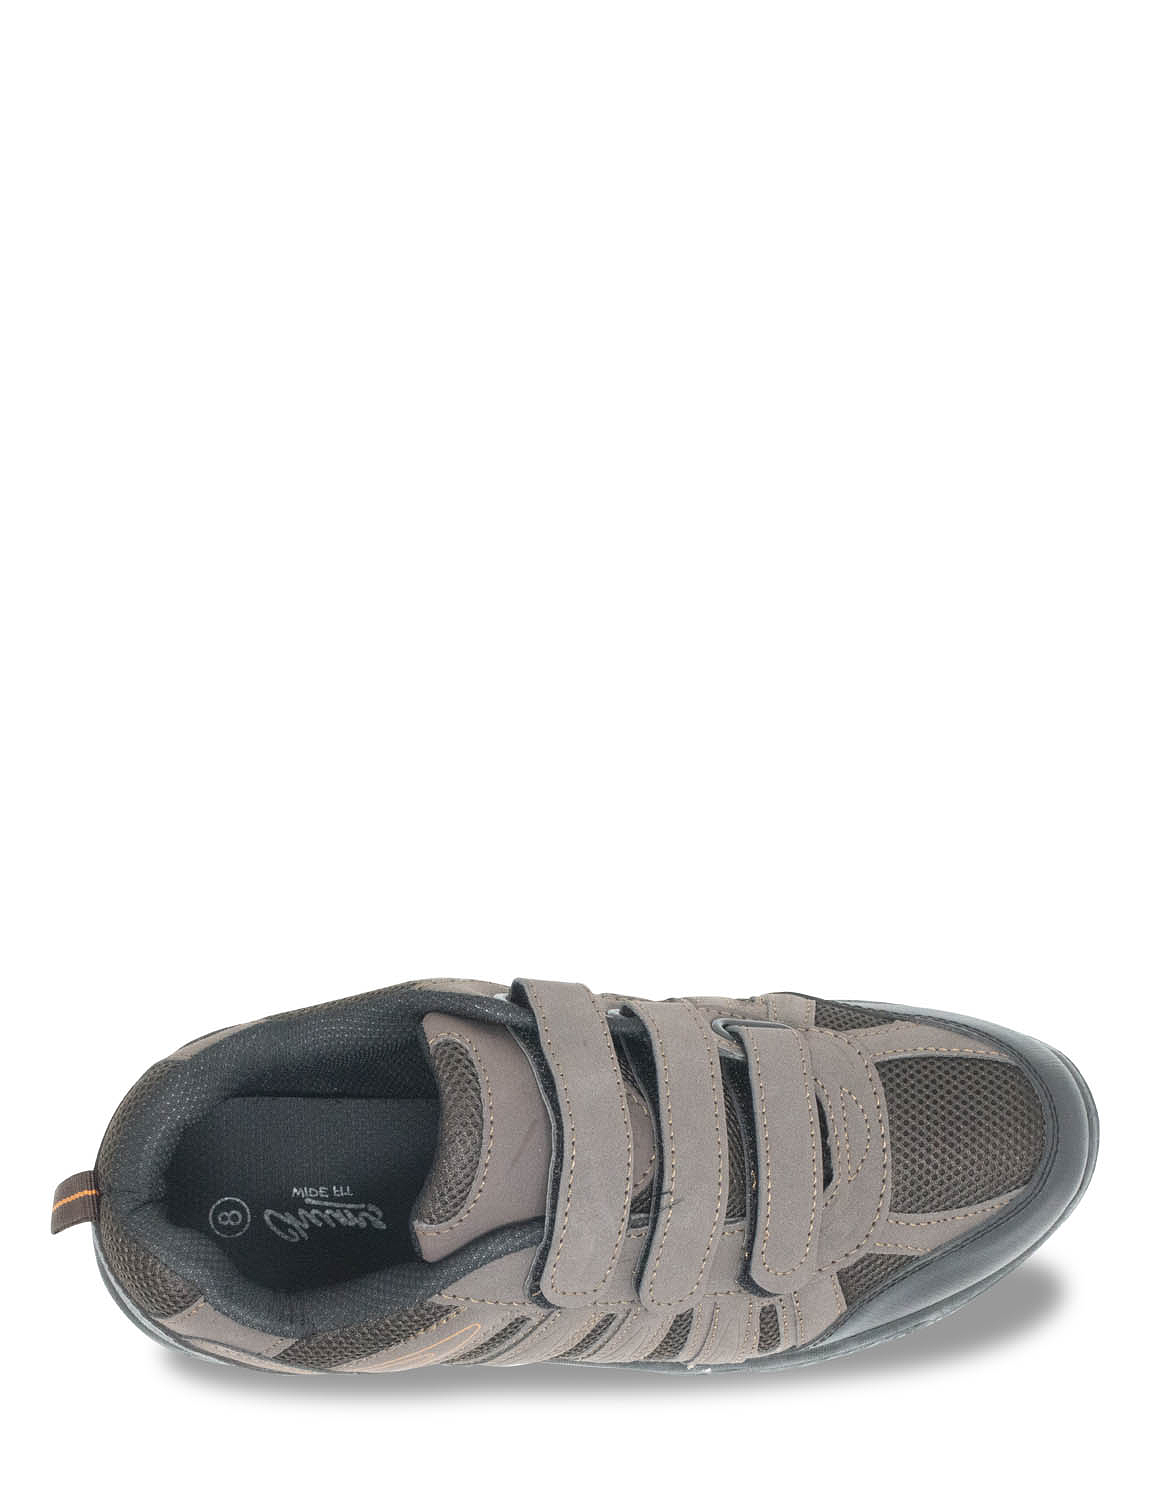 Touch Fasten Wide Fit Walking Shoe | Chums